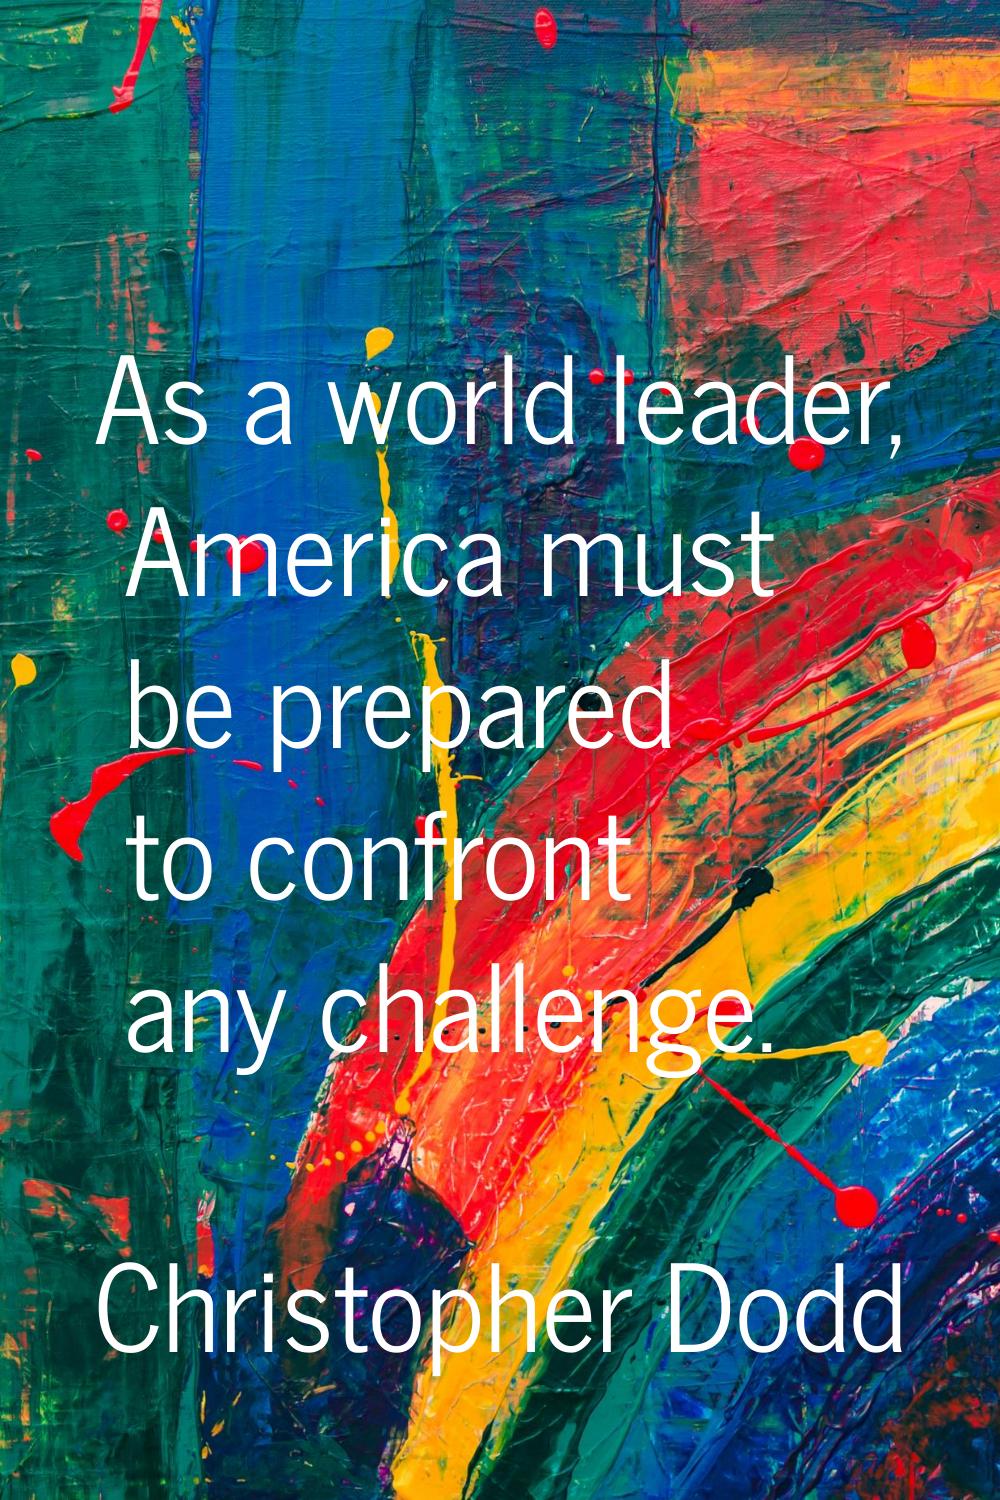 As a world leader, America must be prepared to confront any challenge.